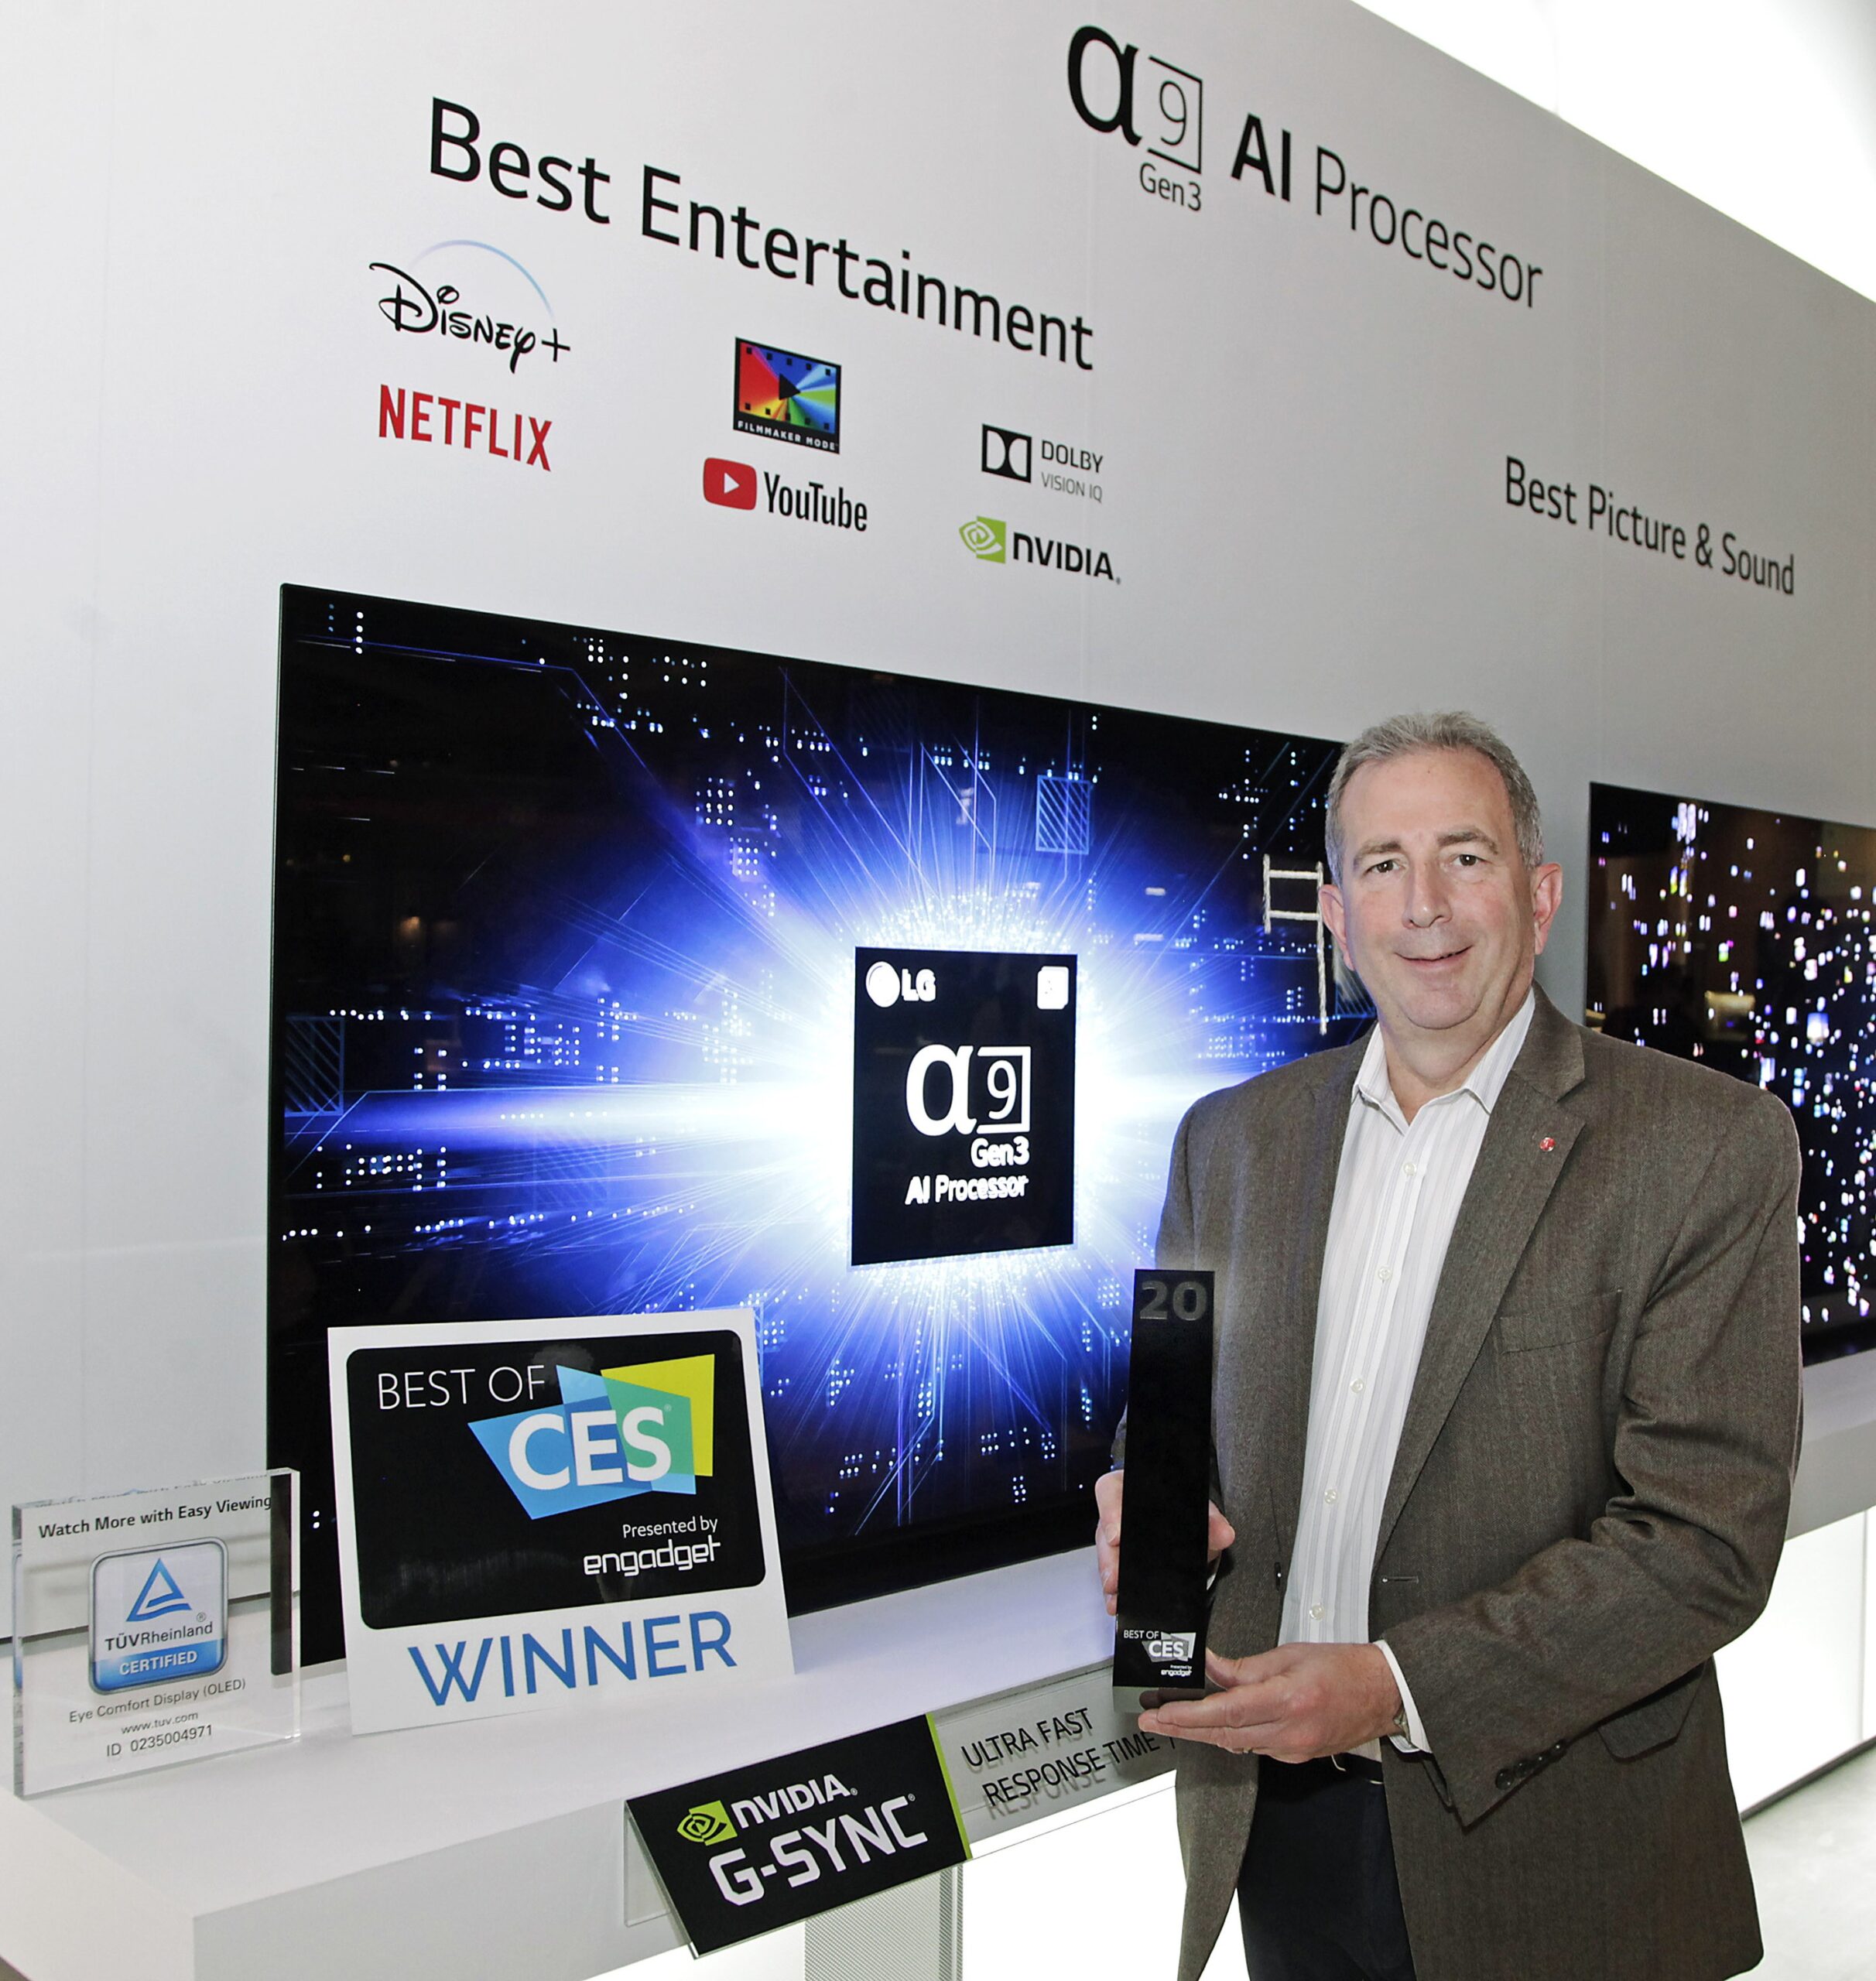 Tim Alessi, LG US’s head of marketing, holding up a Best of CES award in front of the company’s a9 Gen3 AI Processor display at CES 2020